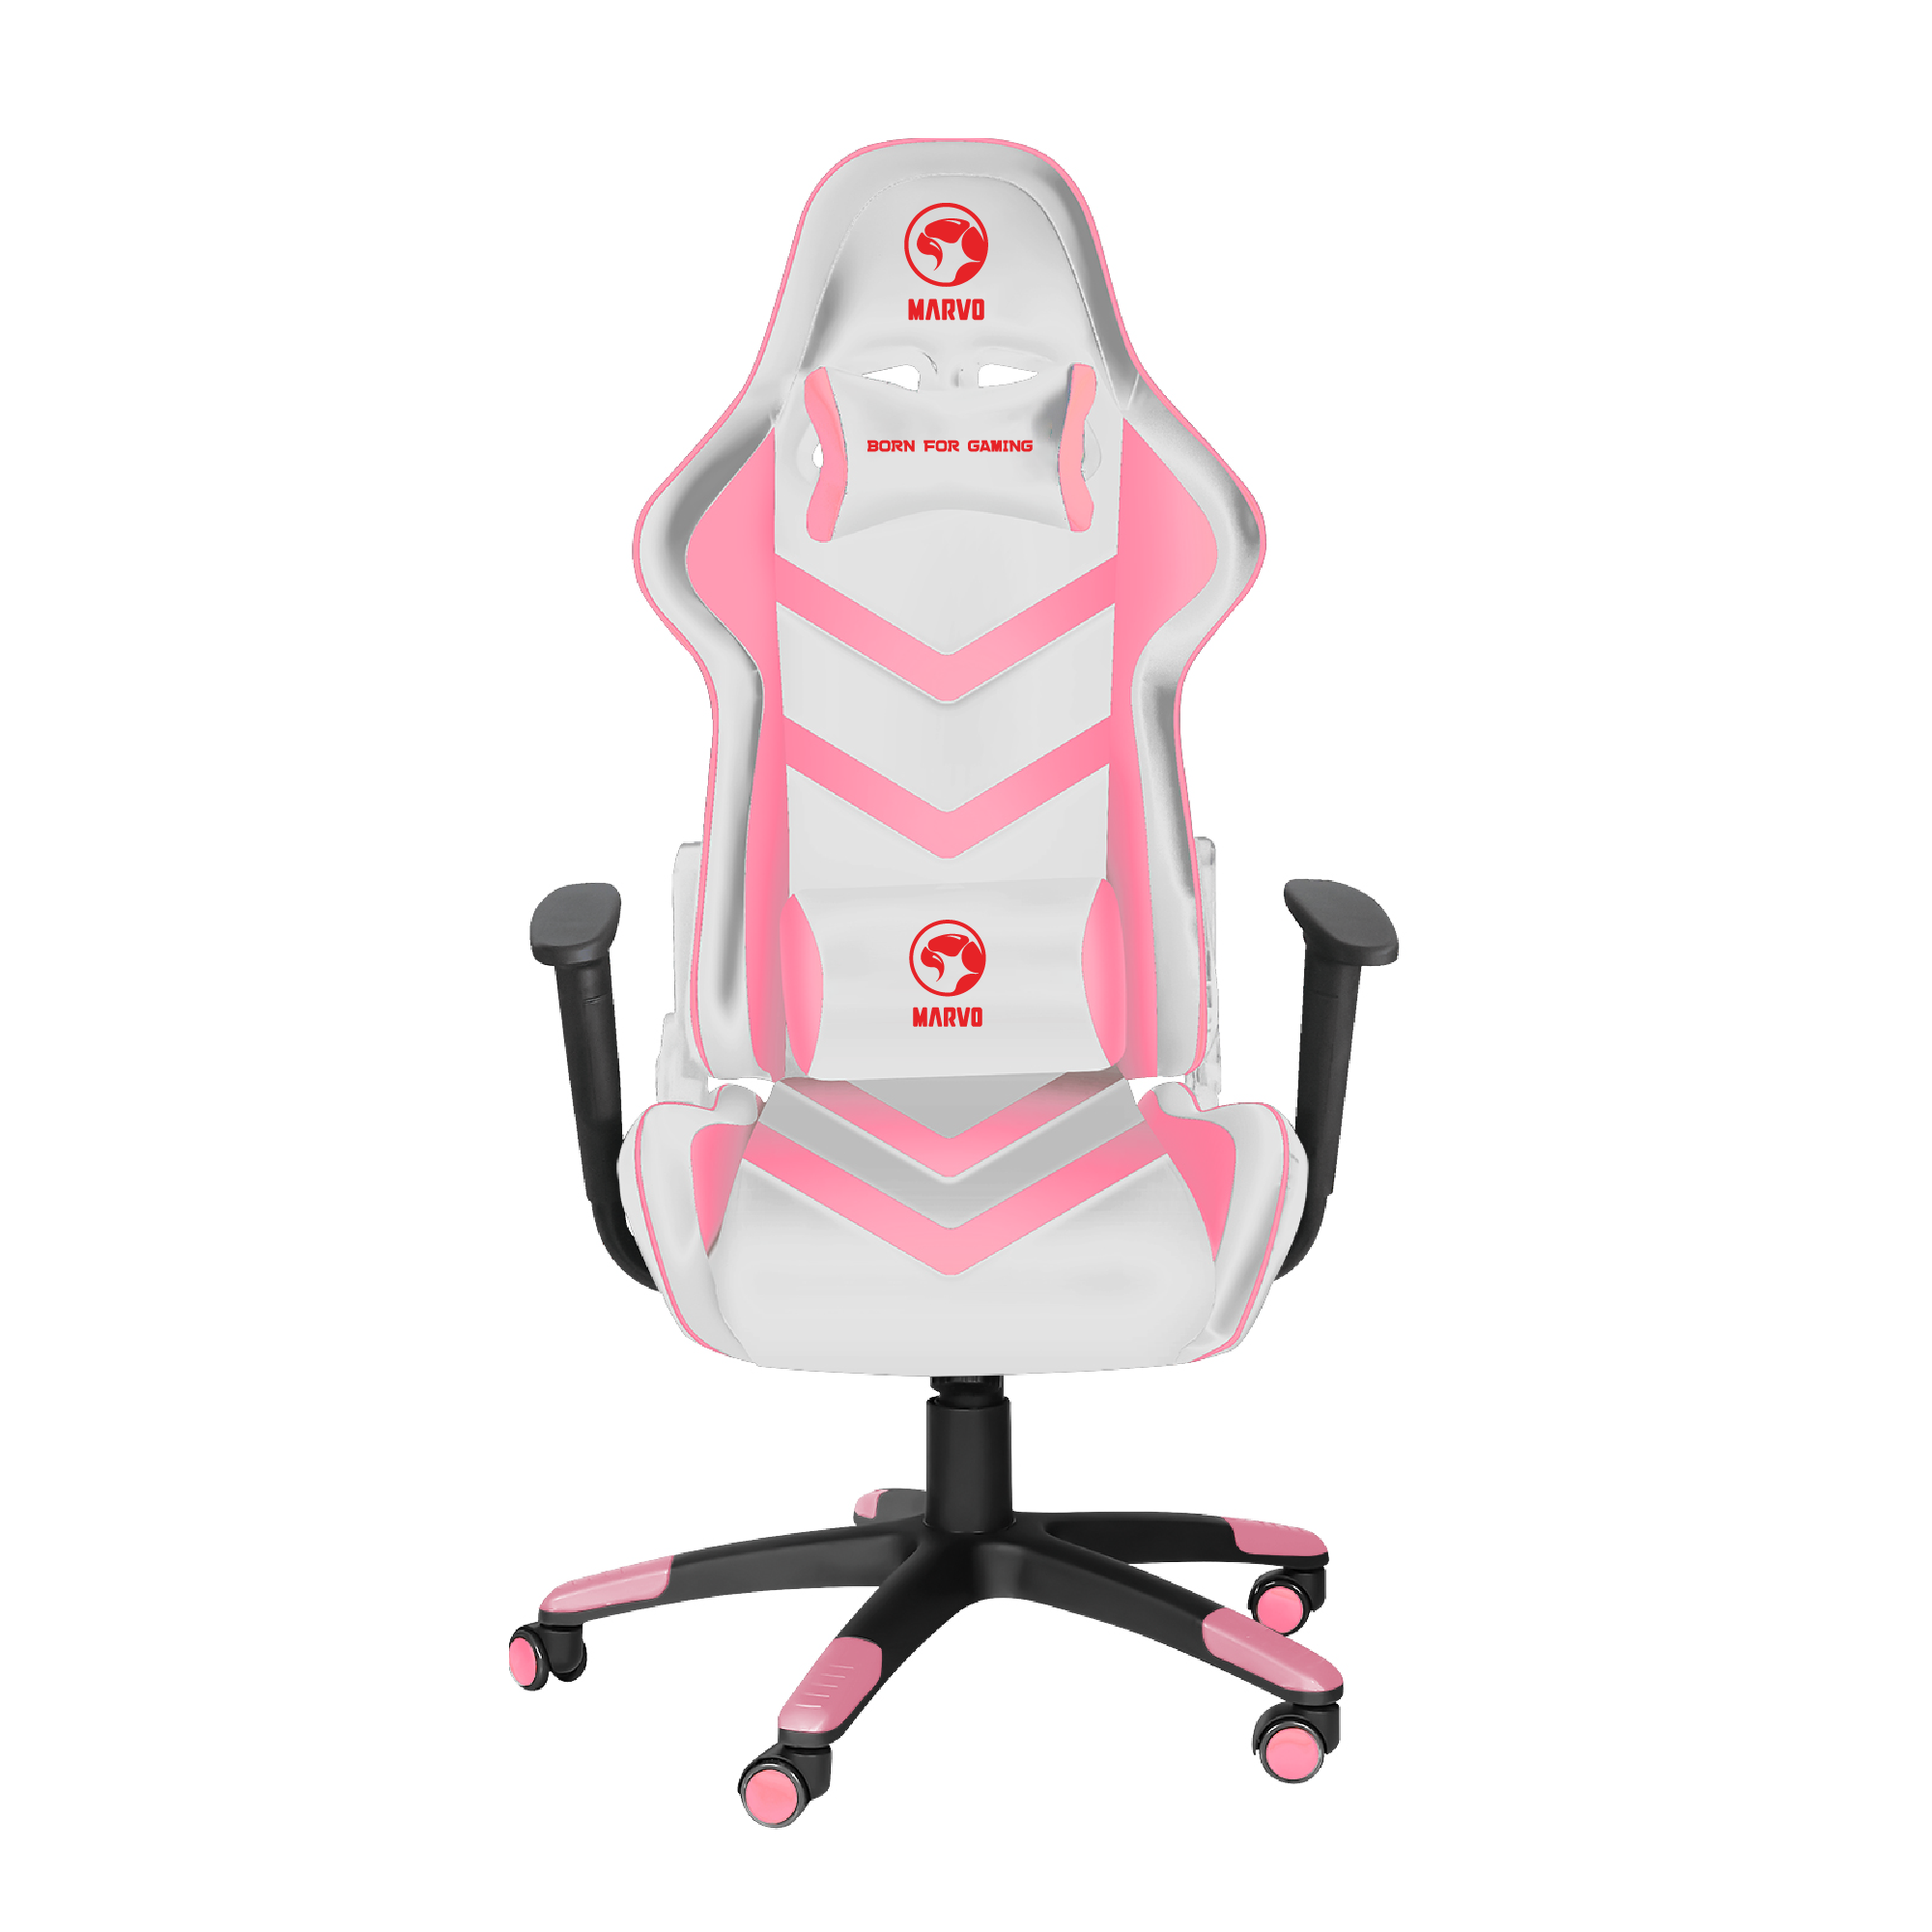 Marvo Tech Accessories Pink Gaming Chair